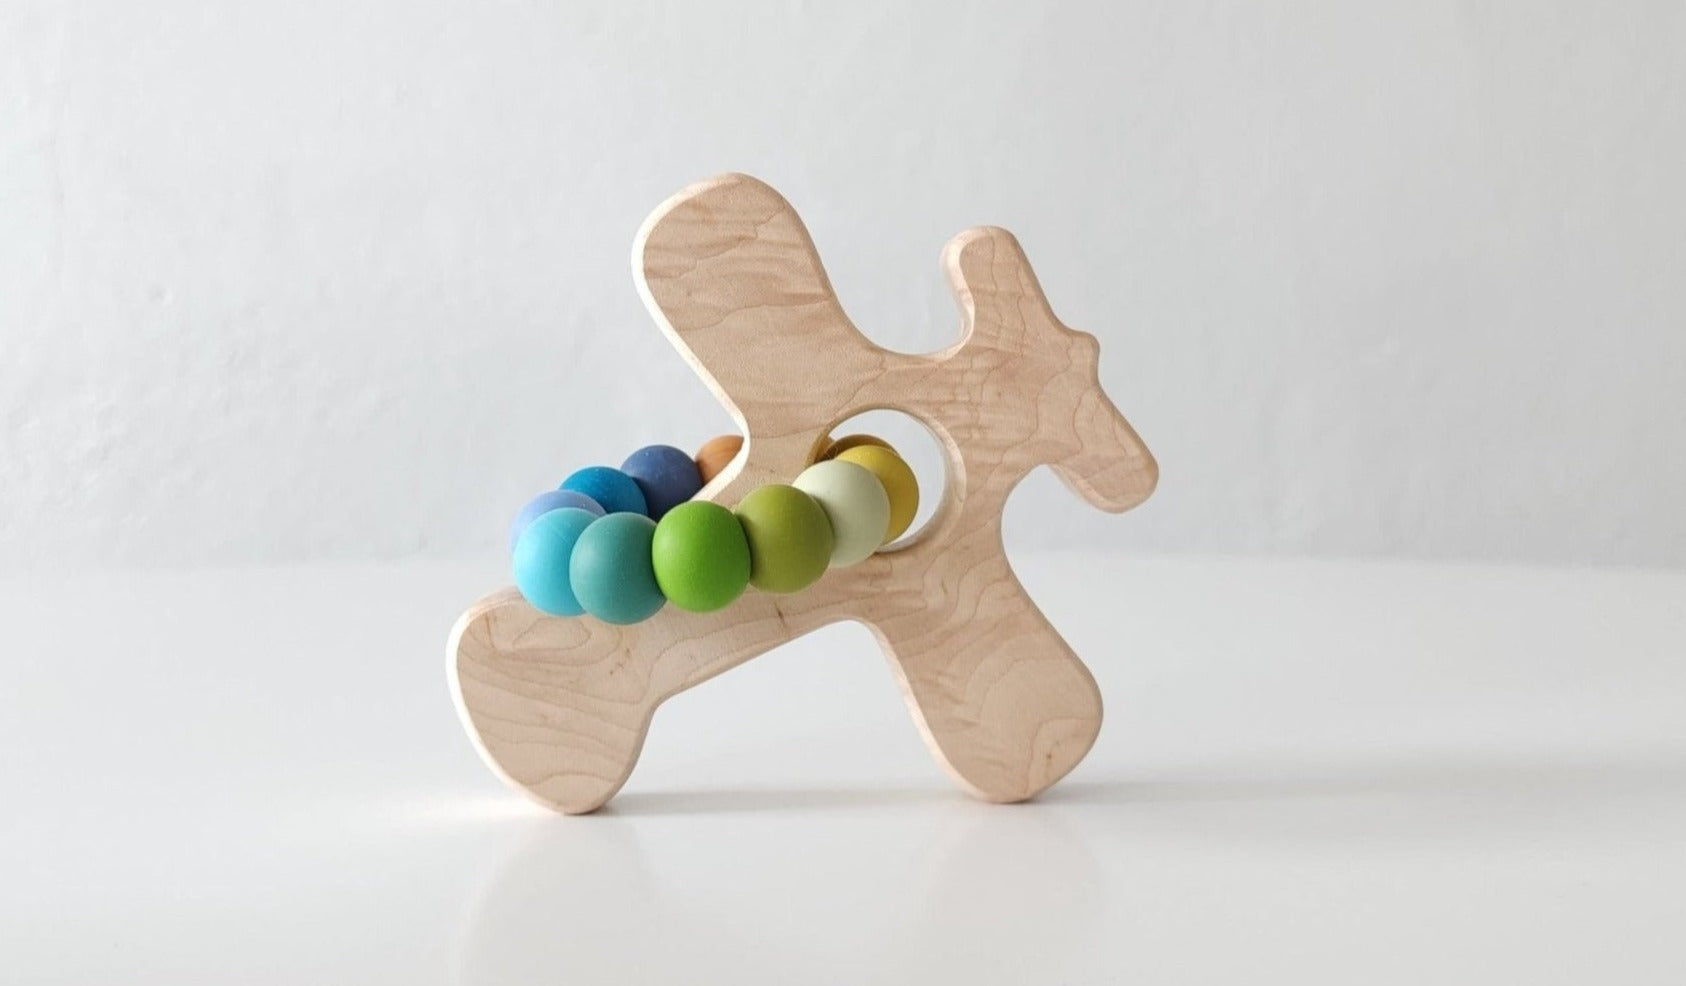 Airplane Wood Grasping Toy With Teething Beads